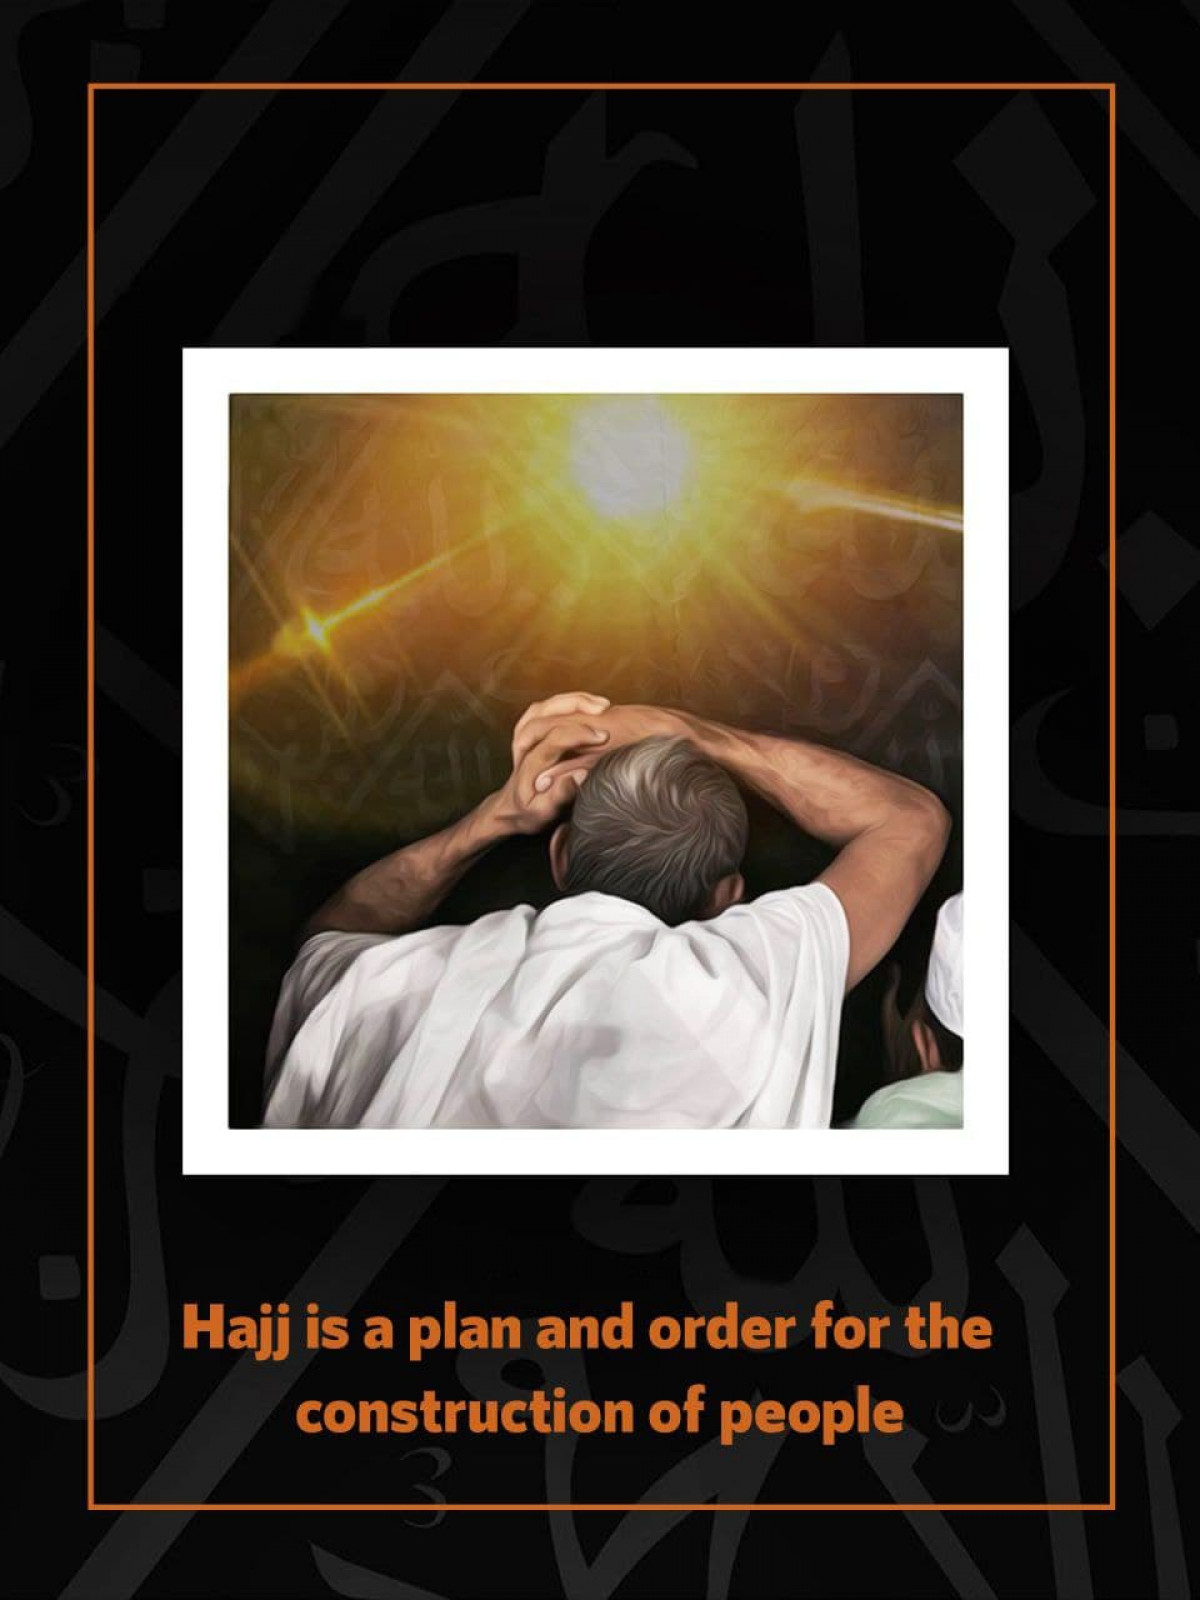 Hajj is a plan and order for the construction of people